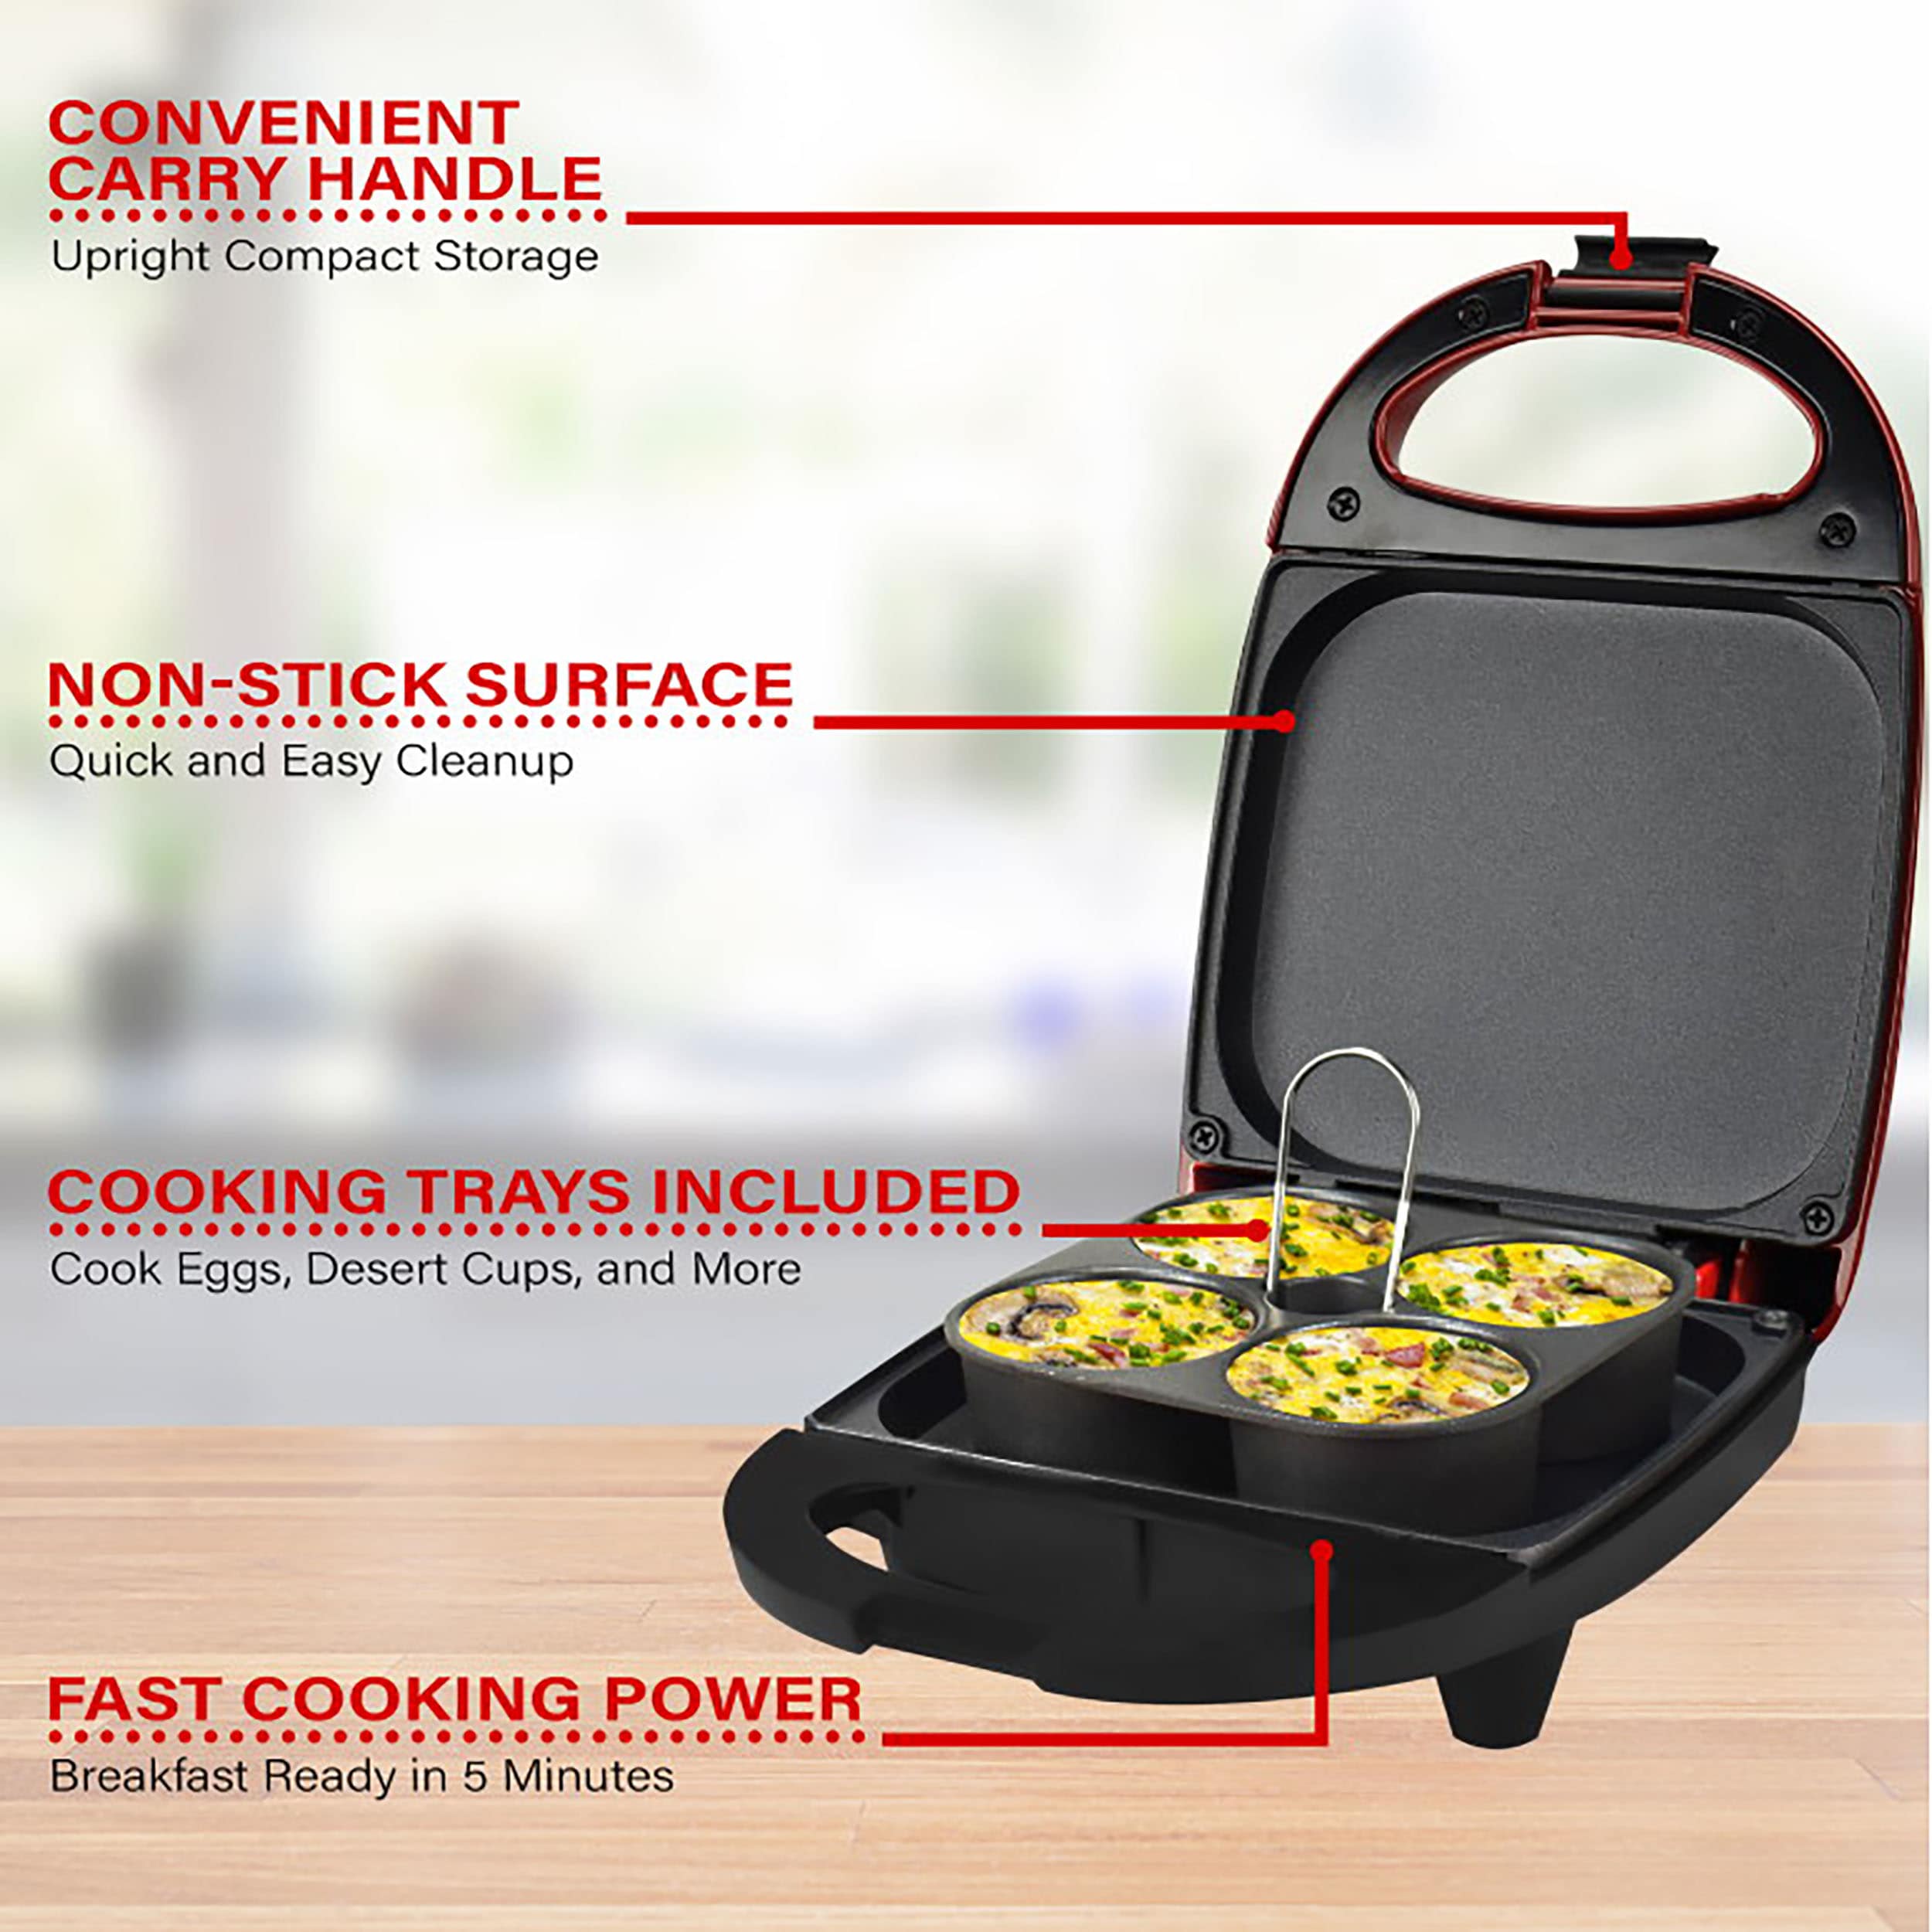 Better Chef - Electric Double Omelet Maker - Red